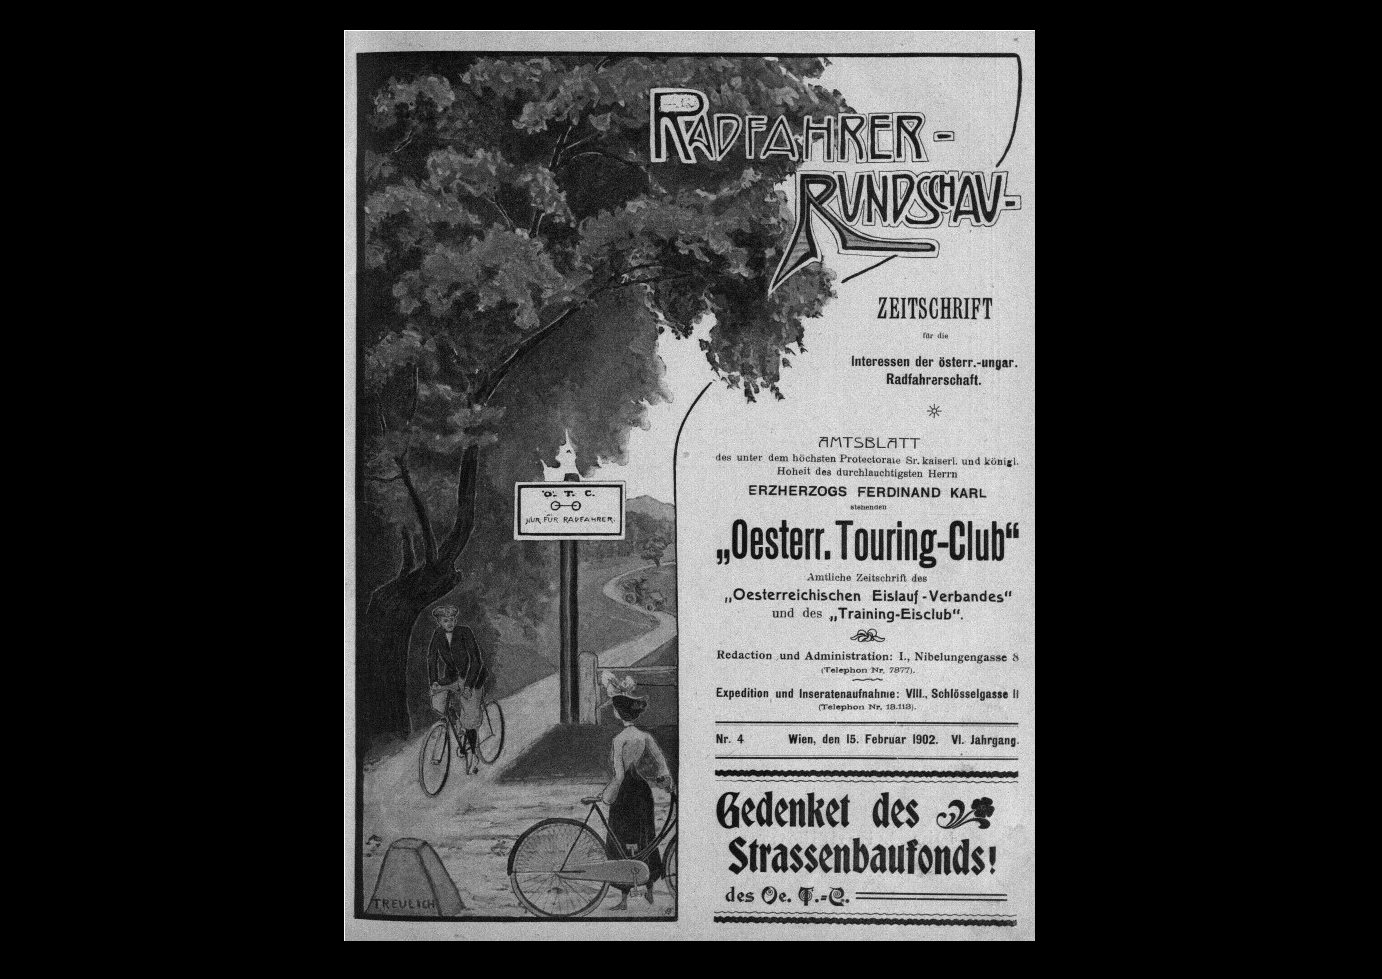 The illustration on the front page of the periodical of the ÖTC cycling club depicts the signage of a cycling path built by the club with the inscription 